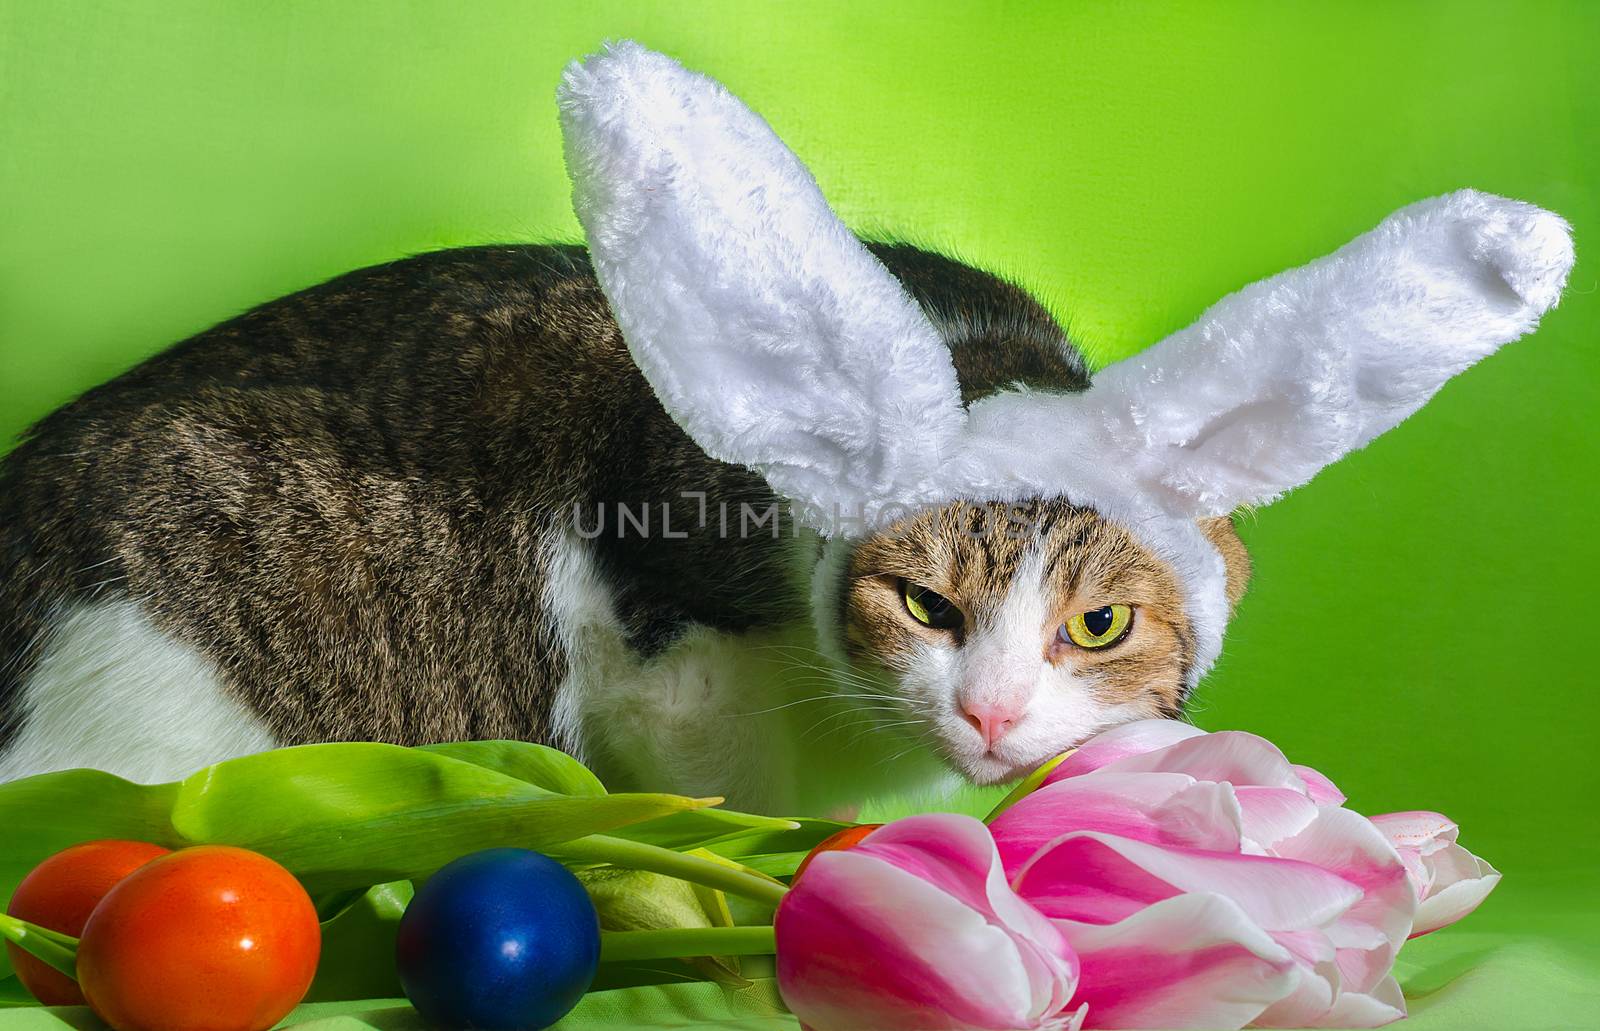 cat with overhead ears depicts an Easter rabbit among the flowers of pink tulips and colorful eggs on a bright green background by Gera8th